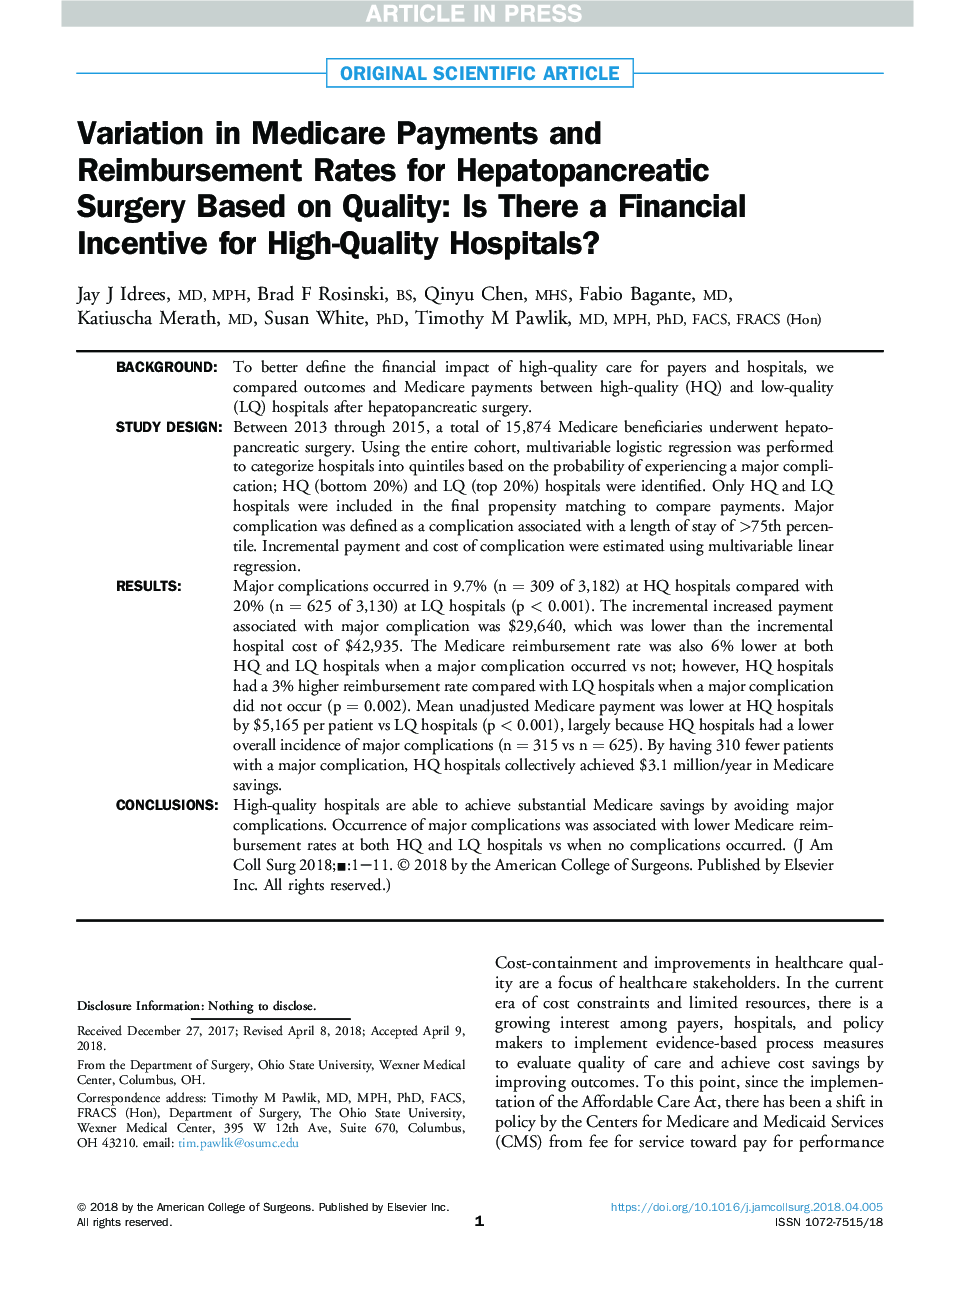 Variation in Medicare Payments and Reimbursement Rates for Hepatopancreatic Surgery Based on Quality: Is There a Financial IncentiveÂ for High-Quality Hospitals?